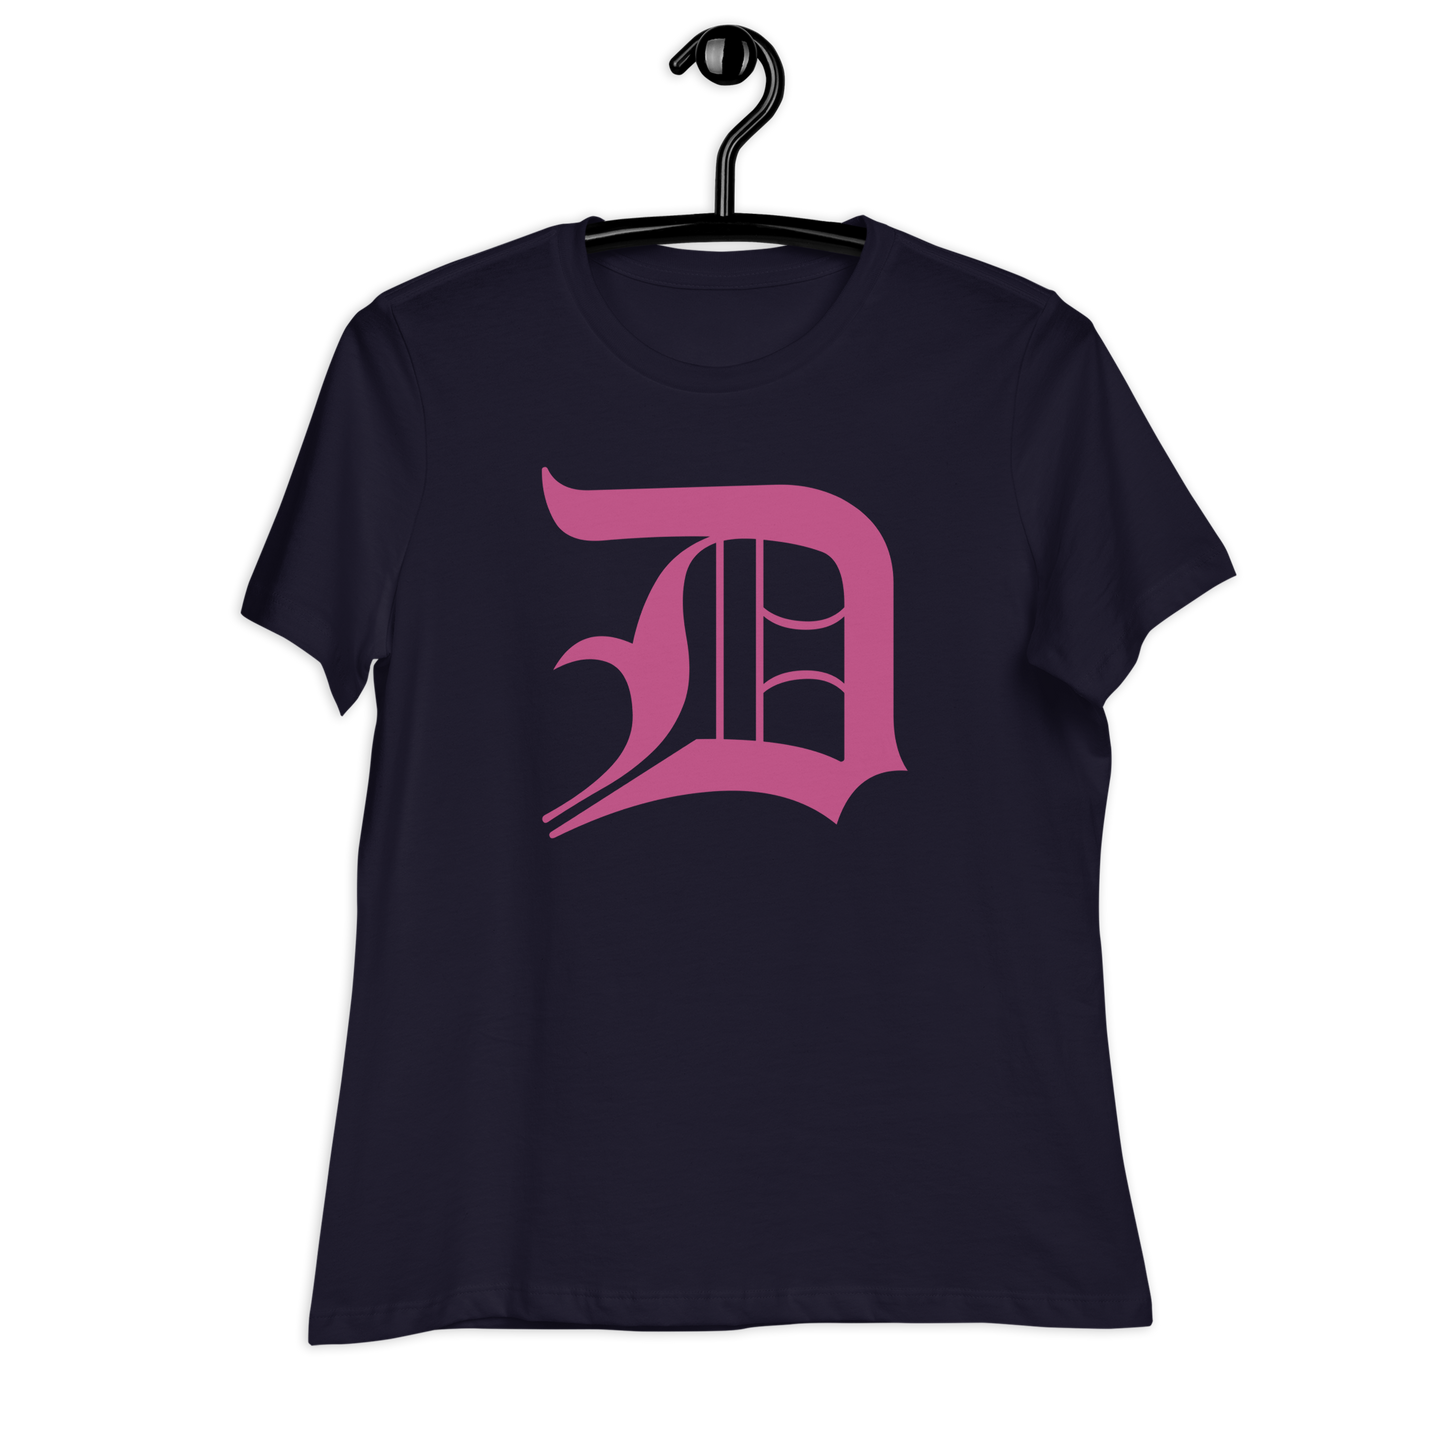 Detroit 'Old English D' T-Shirt (Apple Blossom Pink) | Women's Relaxed Fit